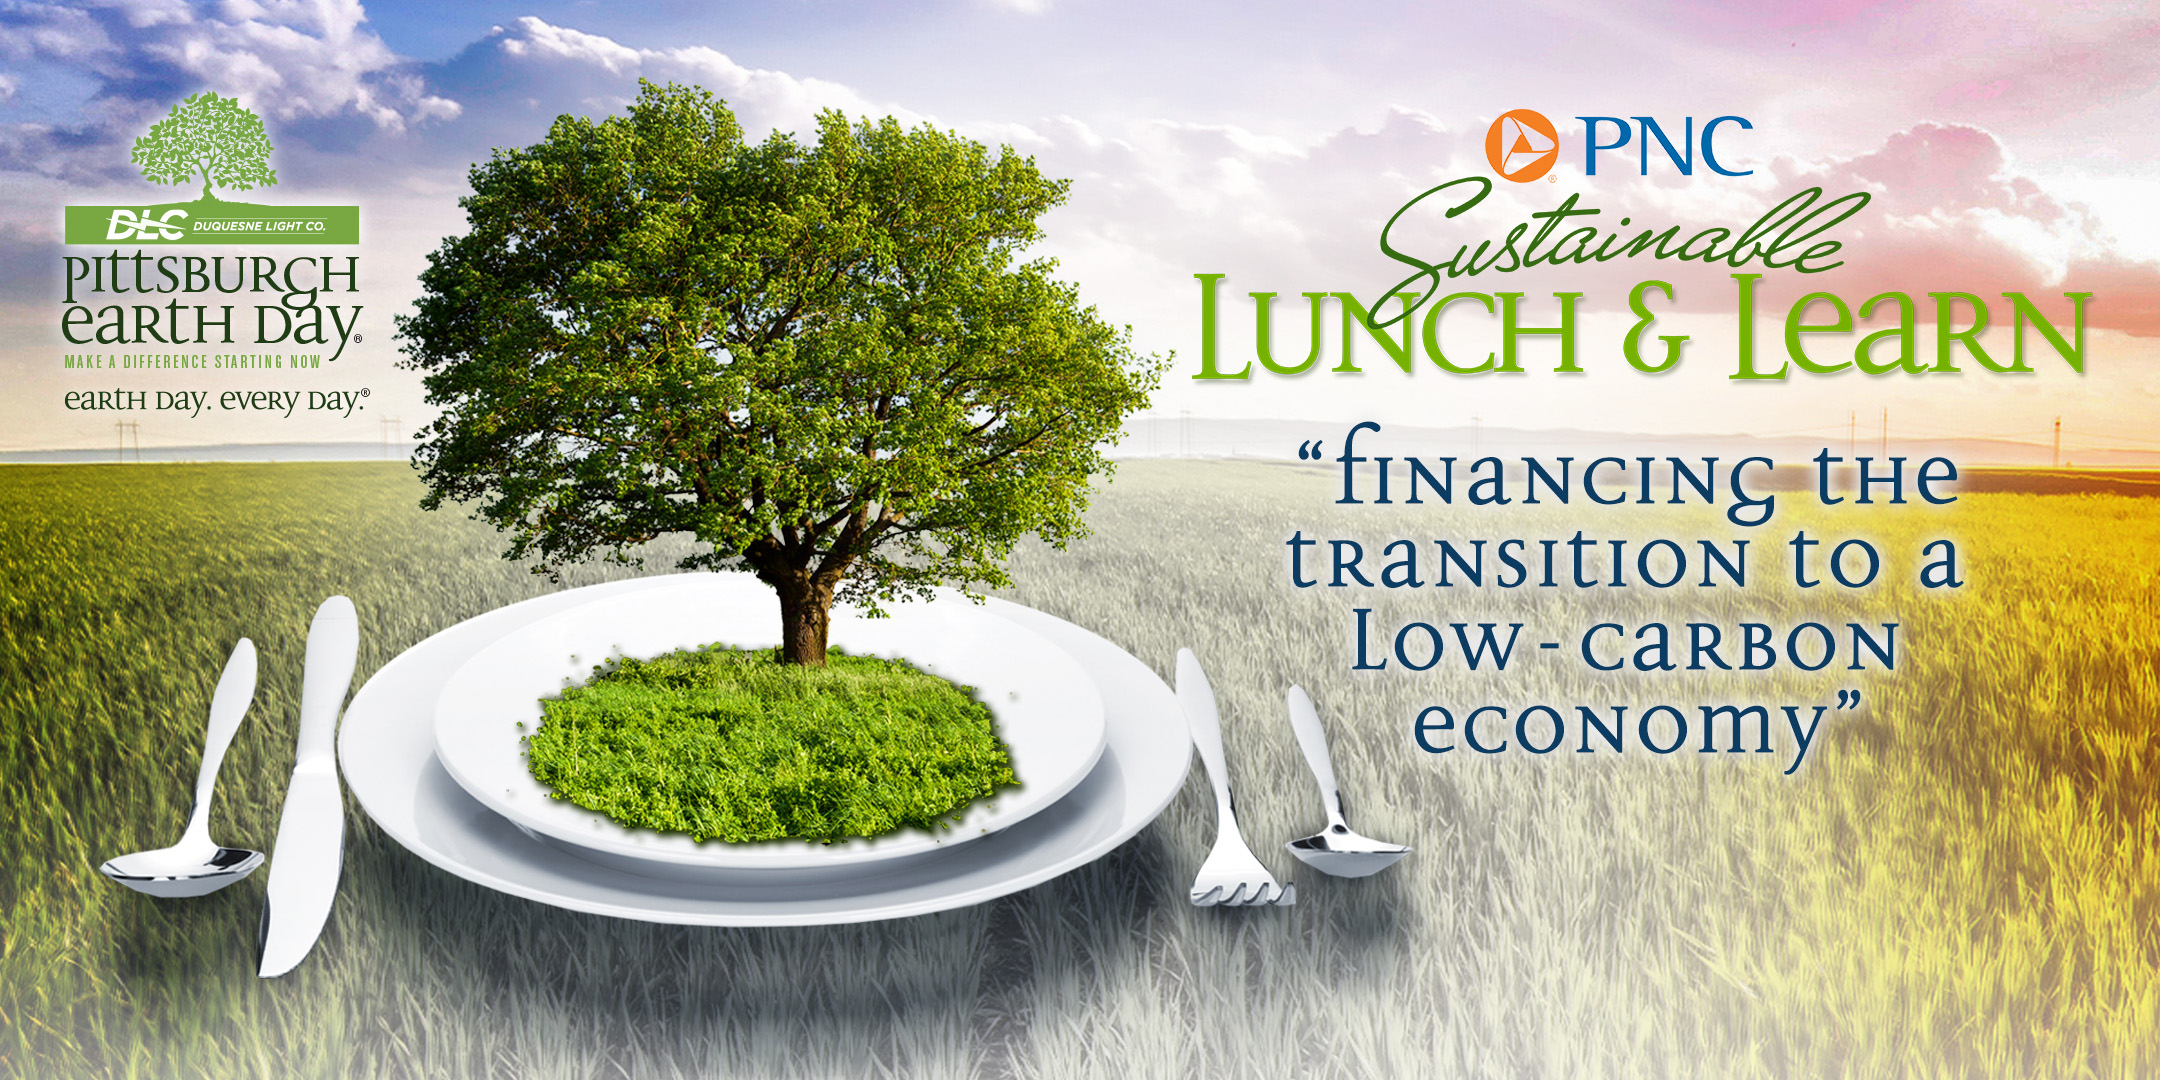 PNC Sustainable Lunch & Learn "Financing the Transition to a low-carbon economy"